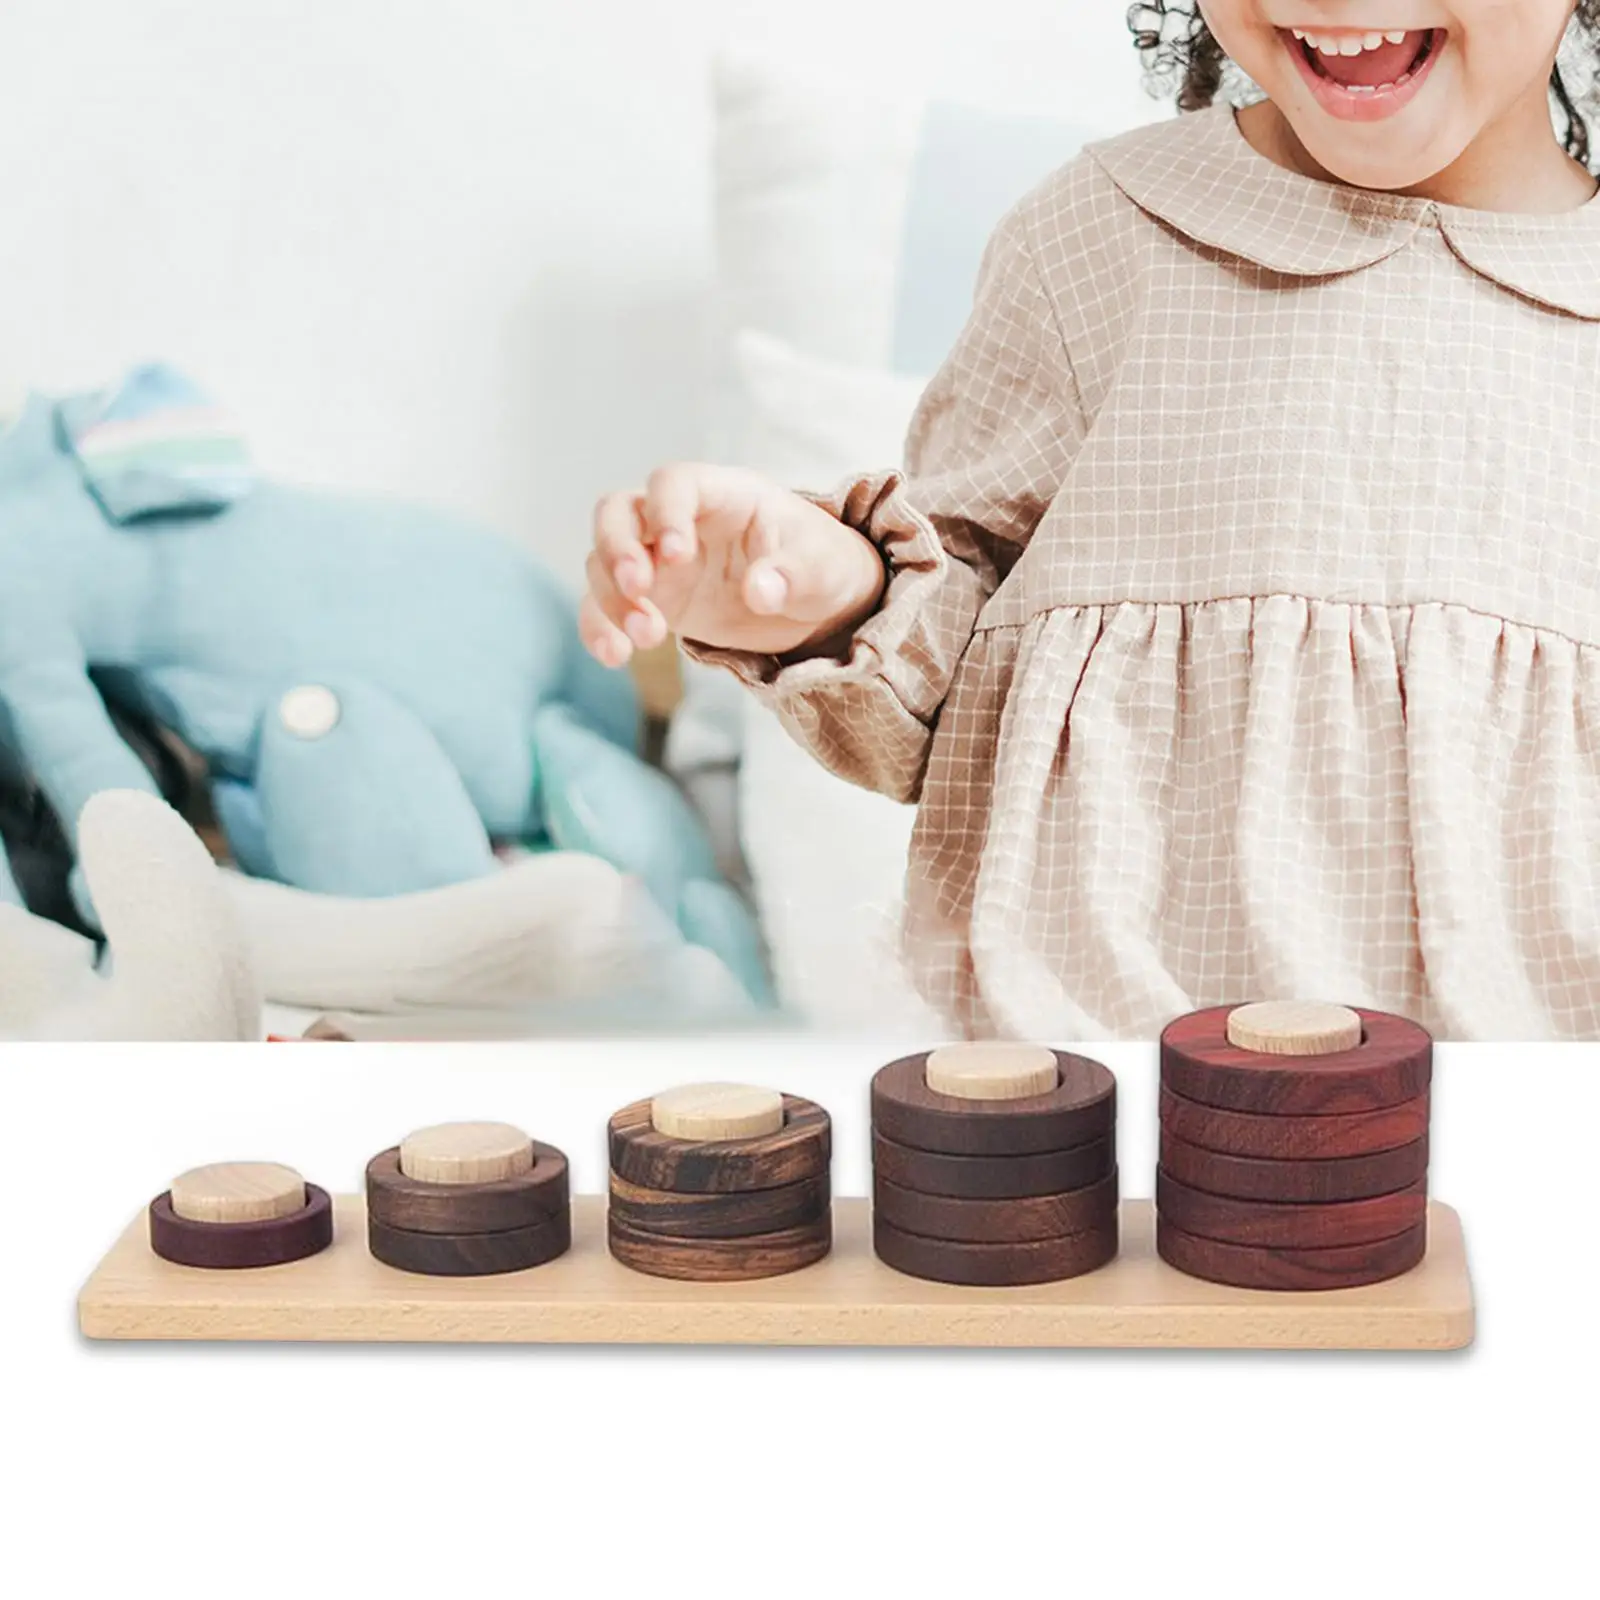 Wooden Stacking Toys Developmental Toy Develop Fine Motor Skill Early Educational Learning Toy for Kids Girls Boy Children Gift